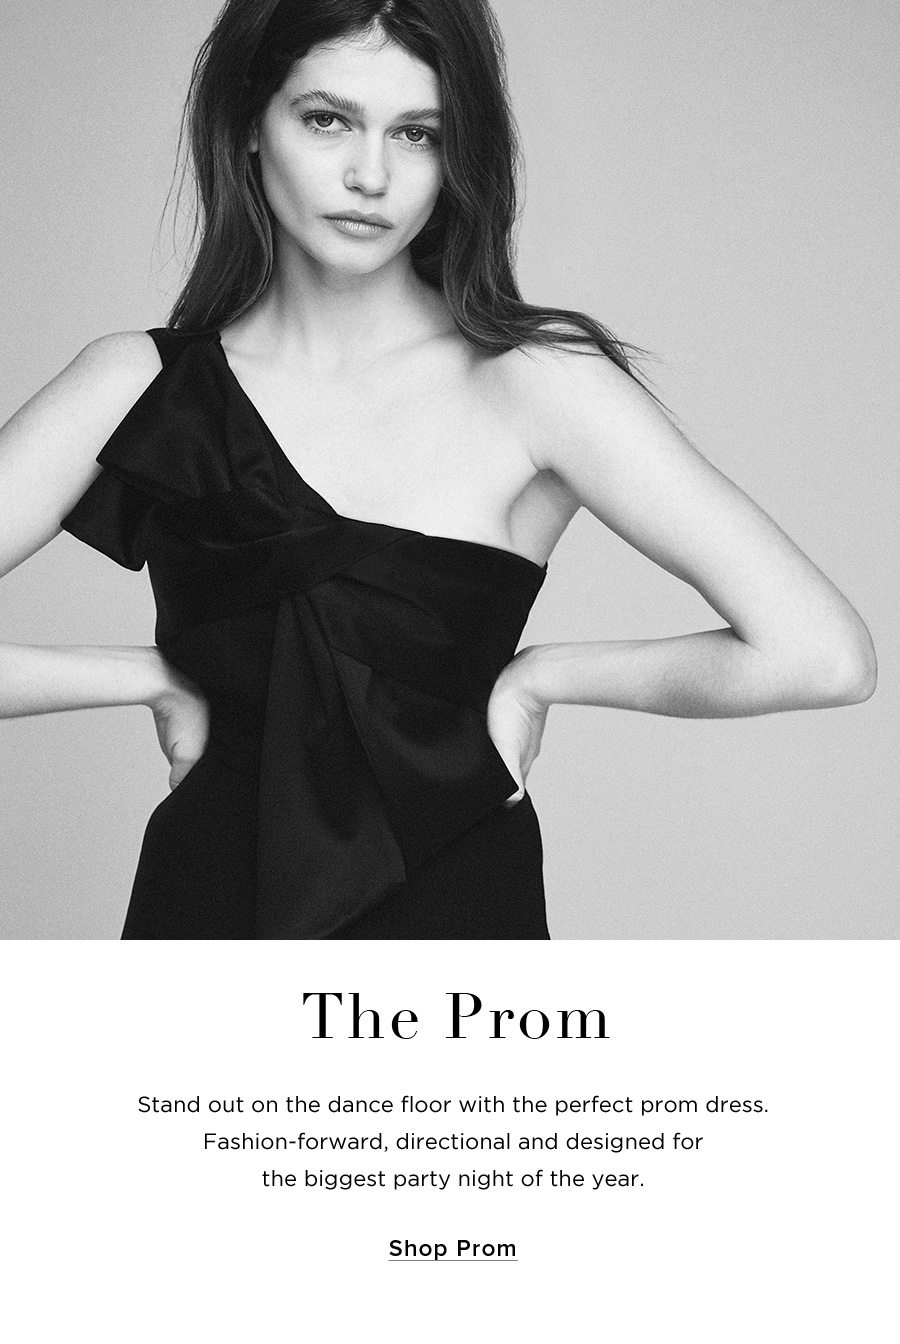 The Prom Stand out on the dance floor with the perfect prom dress. Fashion-forward, directional and designed for the biggest party night of the year. SHOP PROM